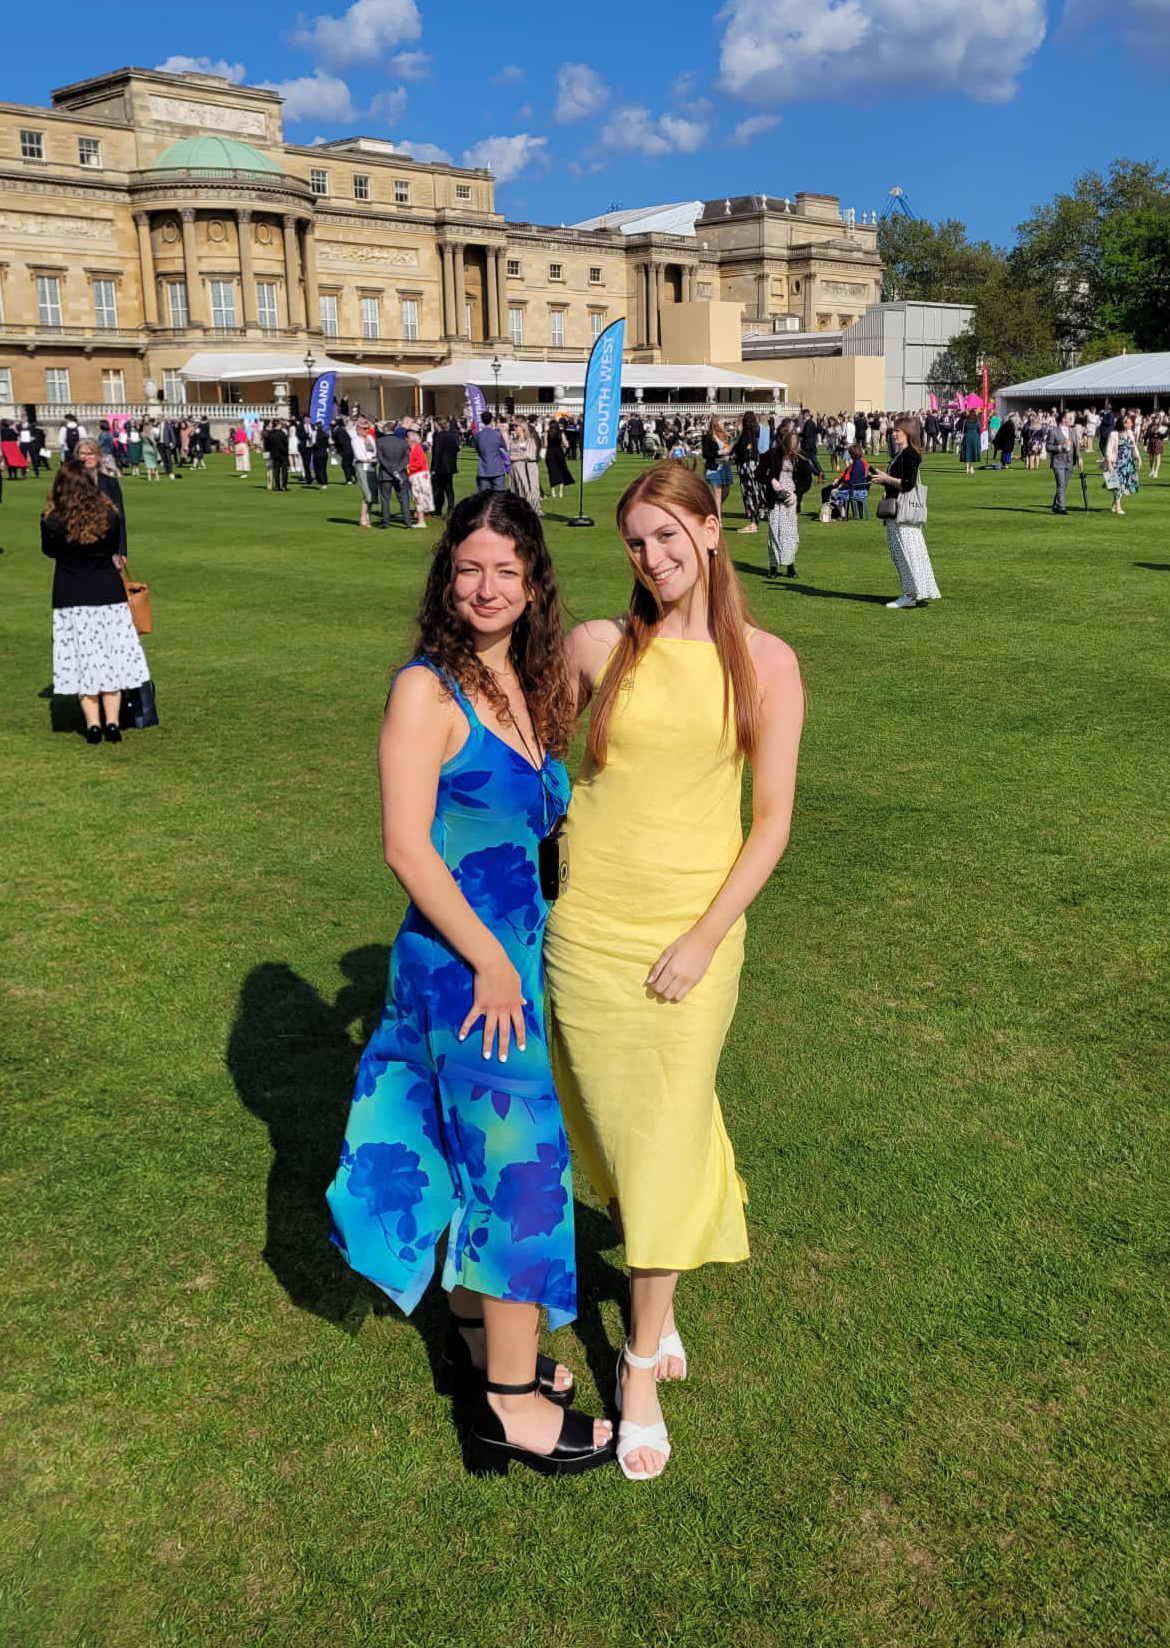 Gryphon School pupil Alice Main, right, at Buckingham Palace